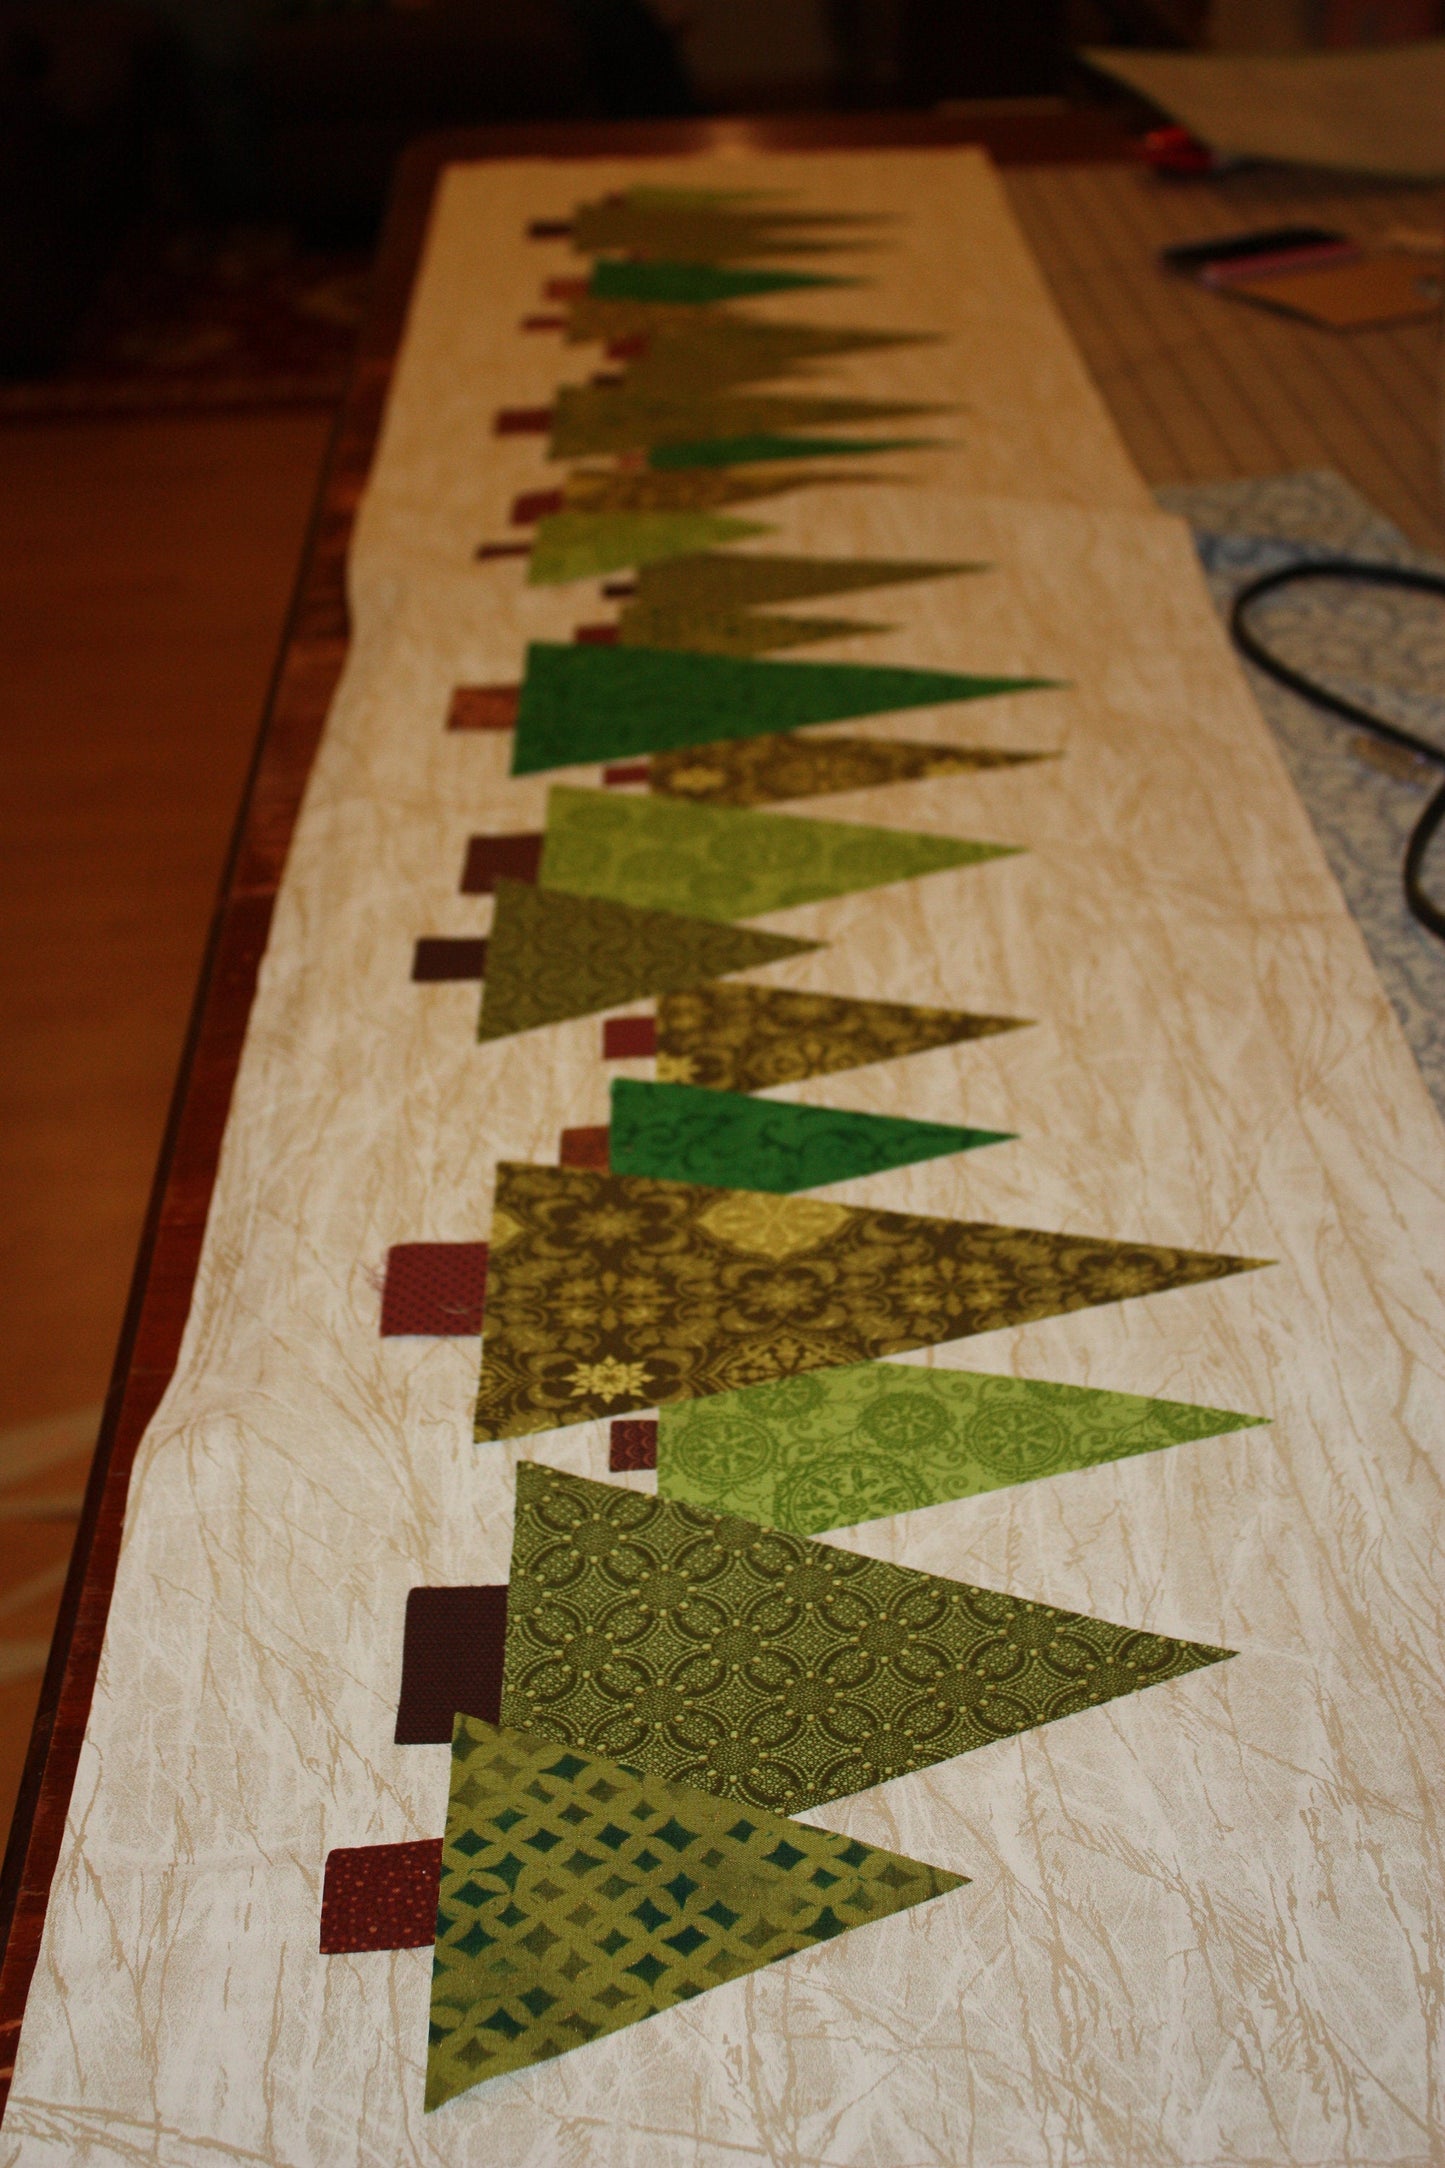 Christmas Tree Table Runner Pattern (Downloadable)